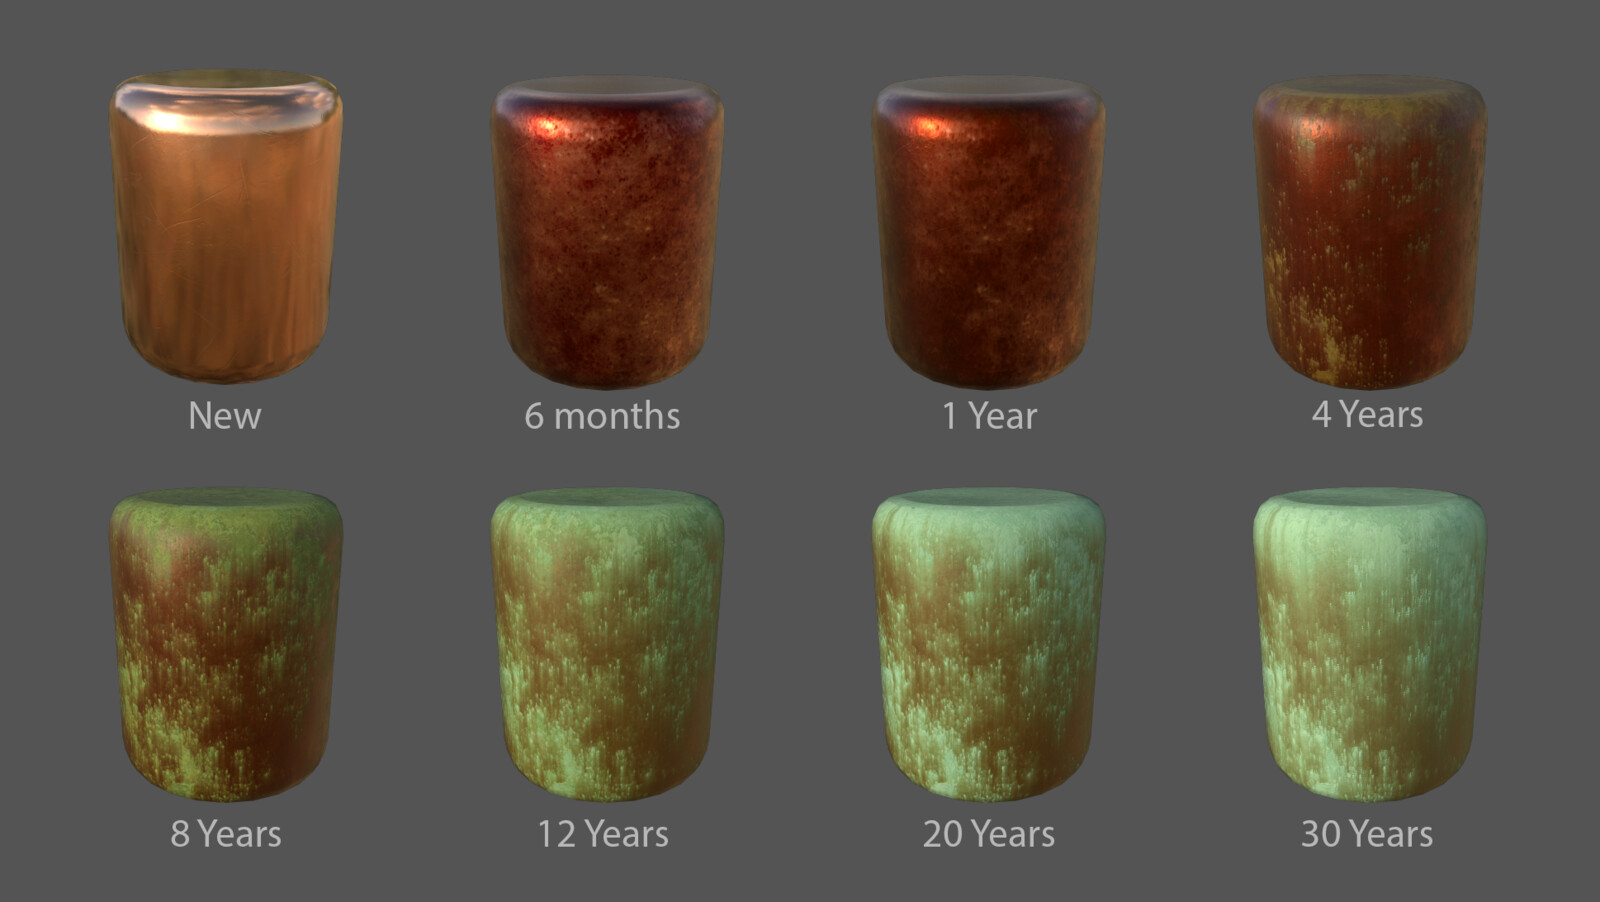 Break down of  simulated tarnish and patina development over time